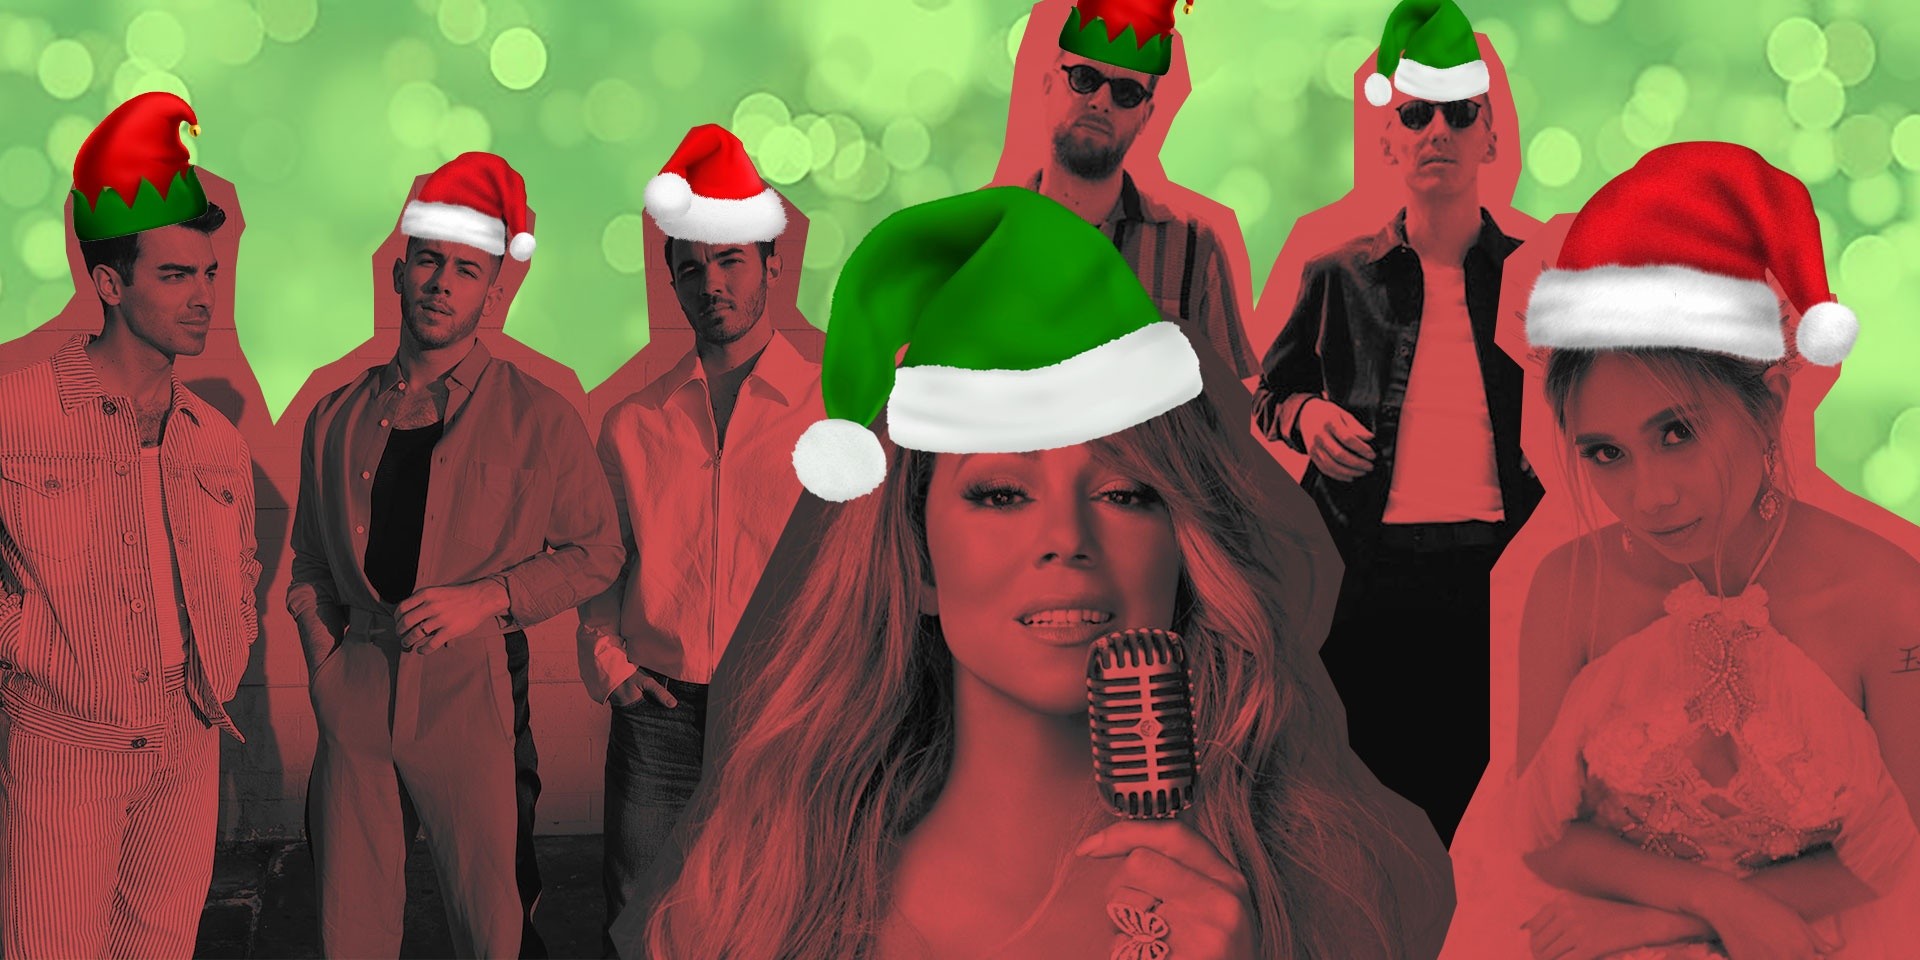 12 Christmas songs to ring in the holidays: Mariah Carey, HONNE, Jonas Brothers, NIKI, and more